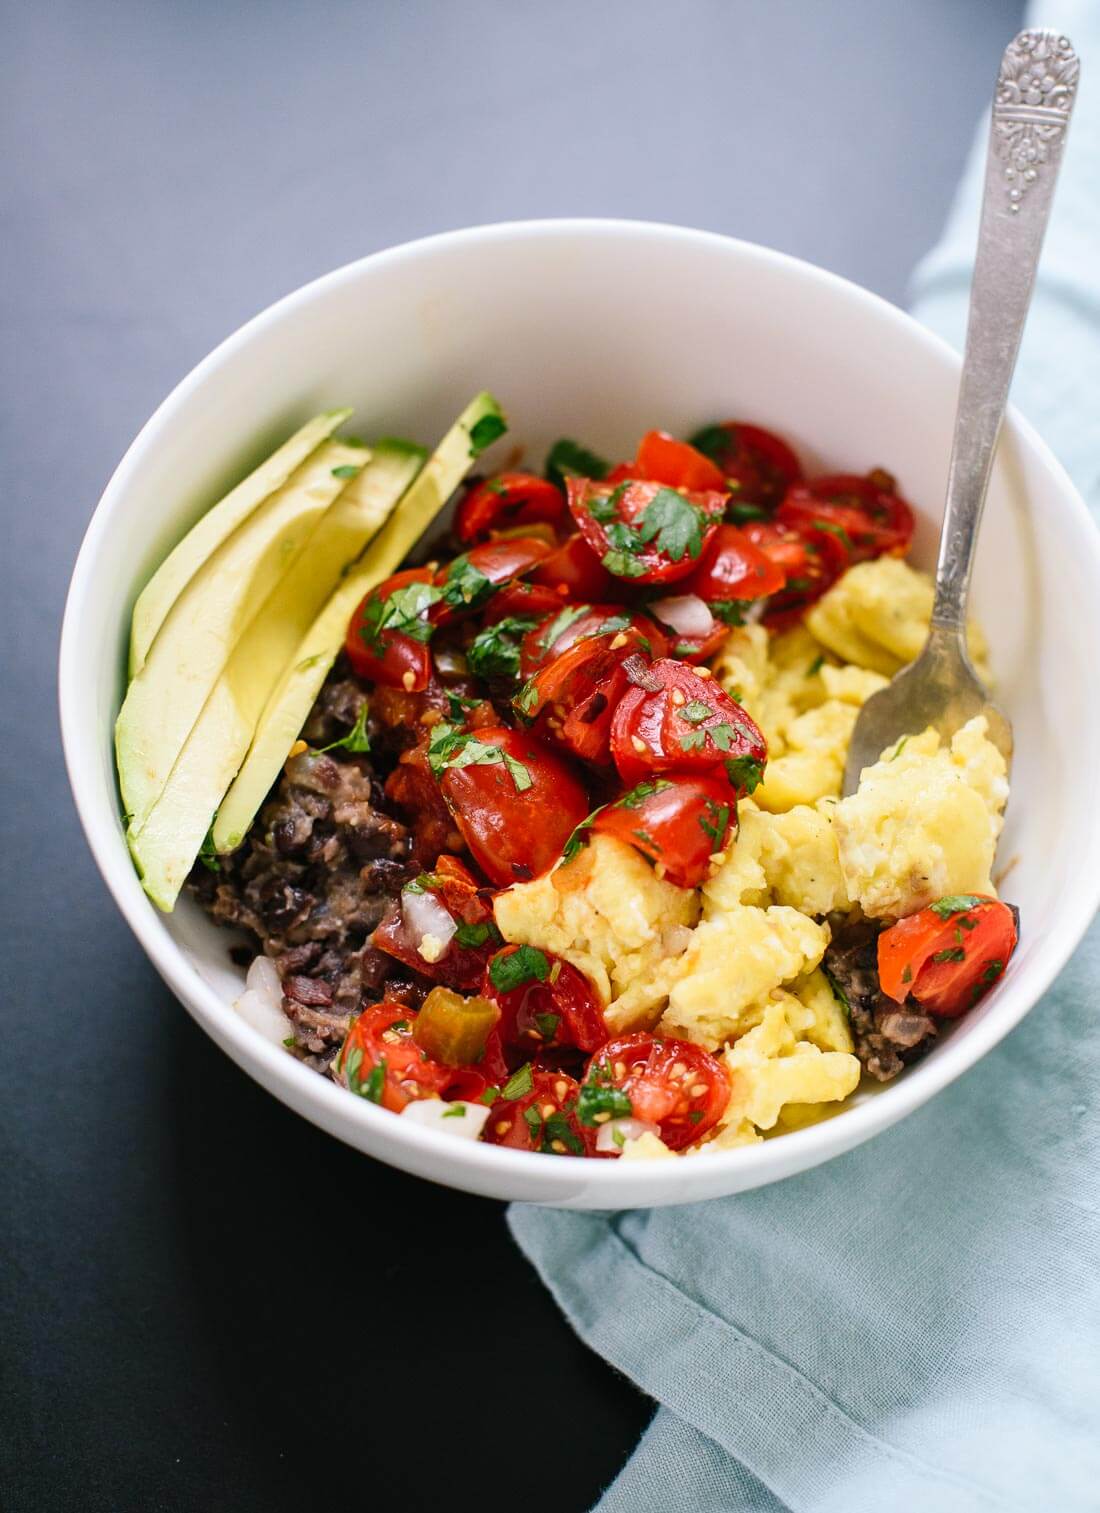 This hearty breakfast bowl features Tex-Mex flavors, including pico de gallo, avocado and black beans - cookieandkate.com